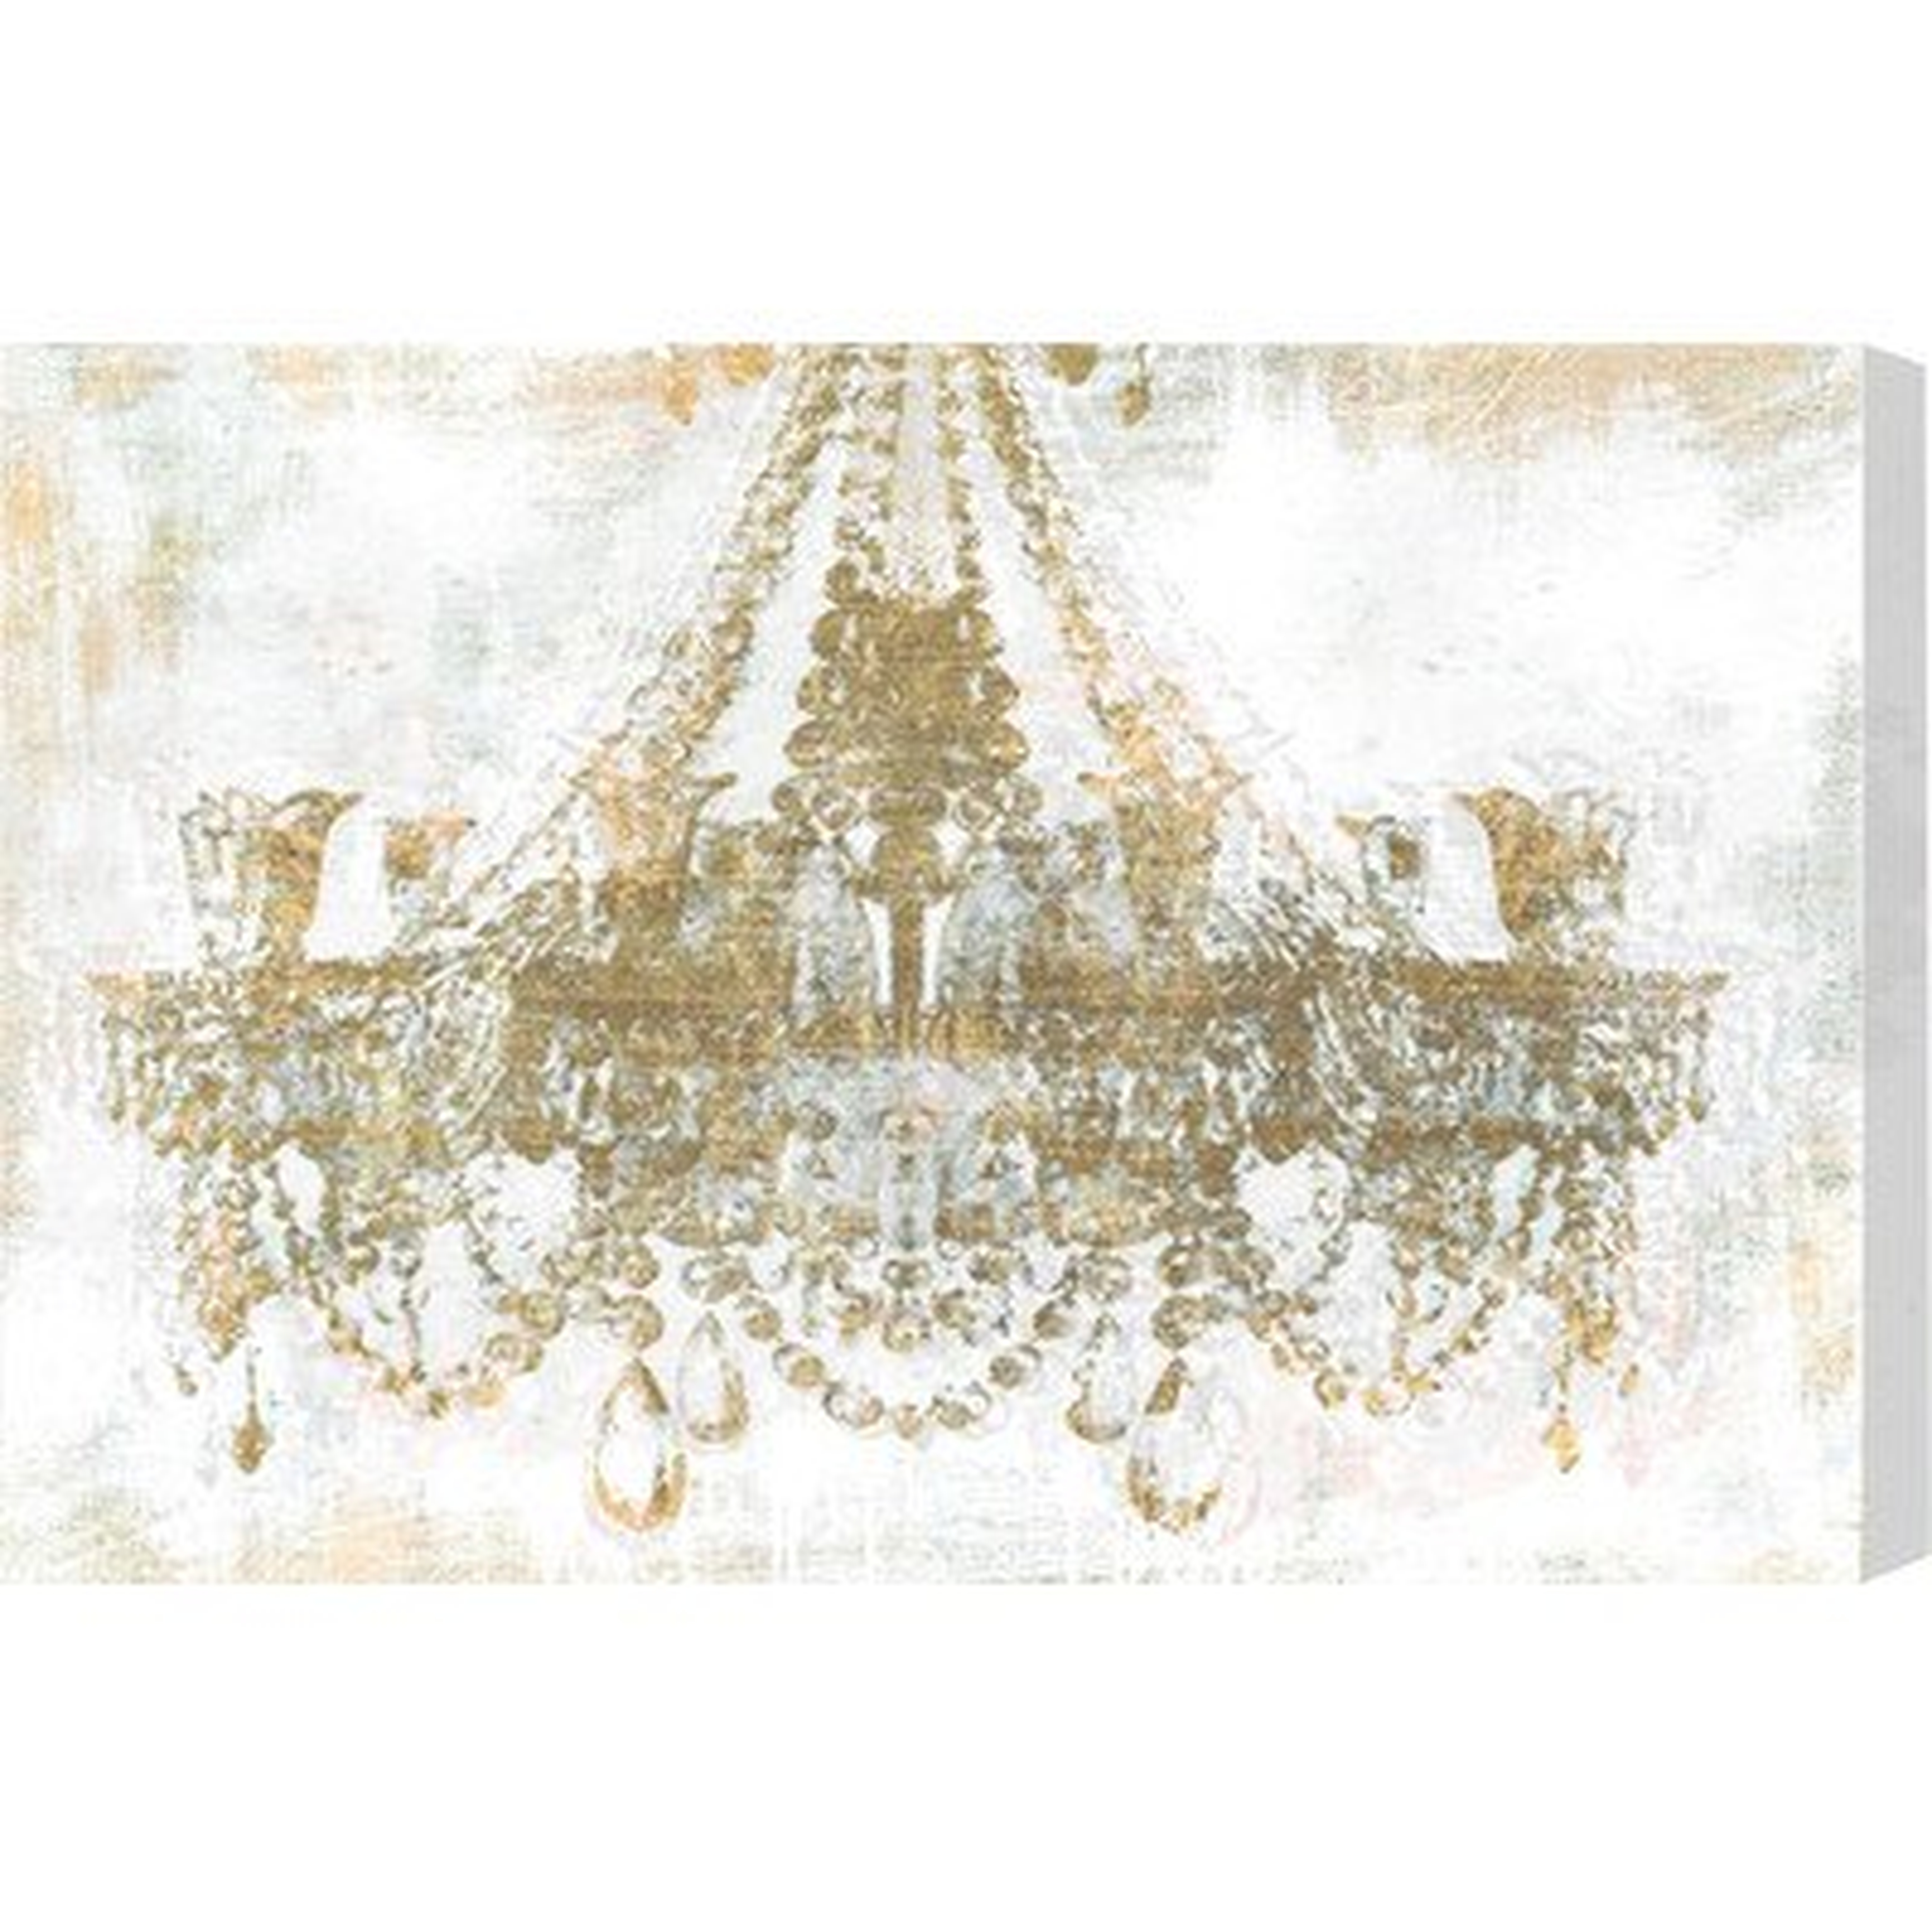 'Gold Diamonds Faded Chandelier' Graphic Art Print on Wrapped Canvas - AllModern